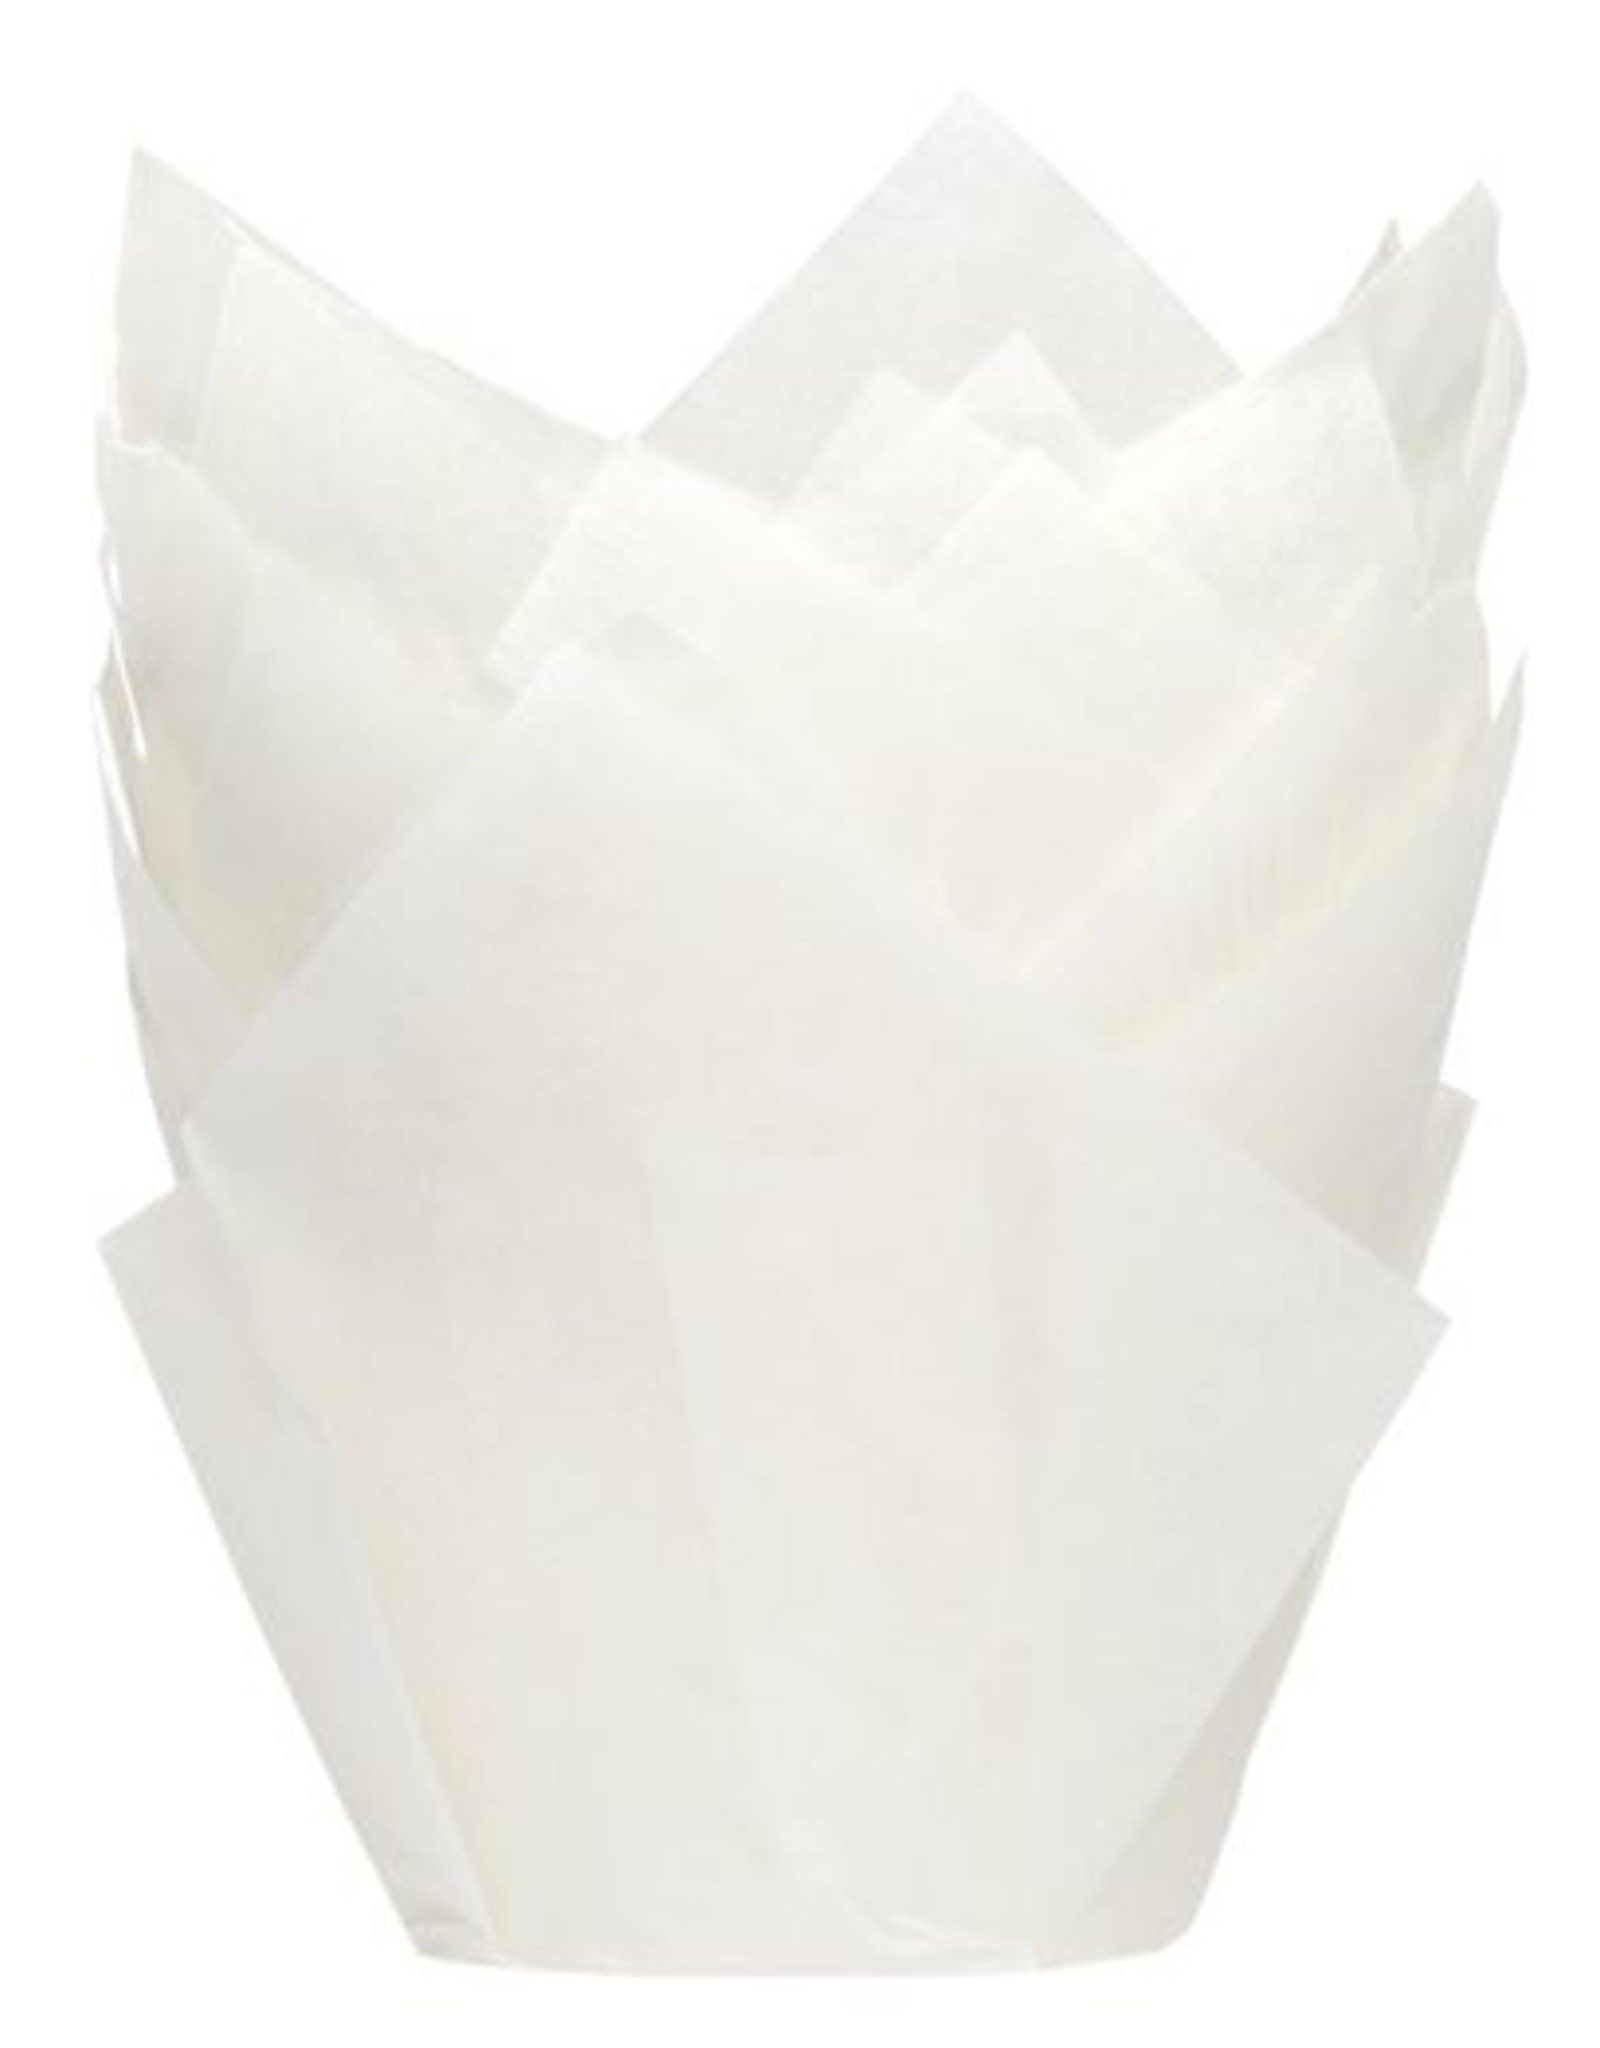 House of Marie House of Marie Muffin Cups Tulp Wit pk/36